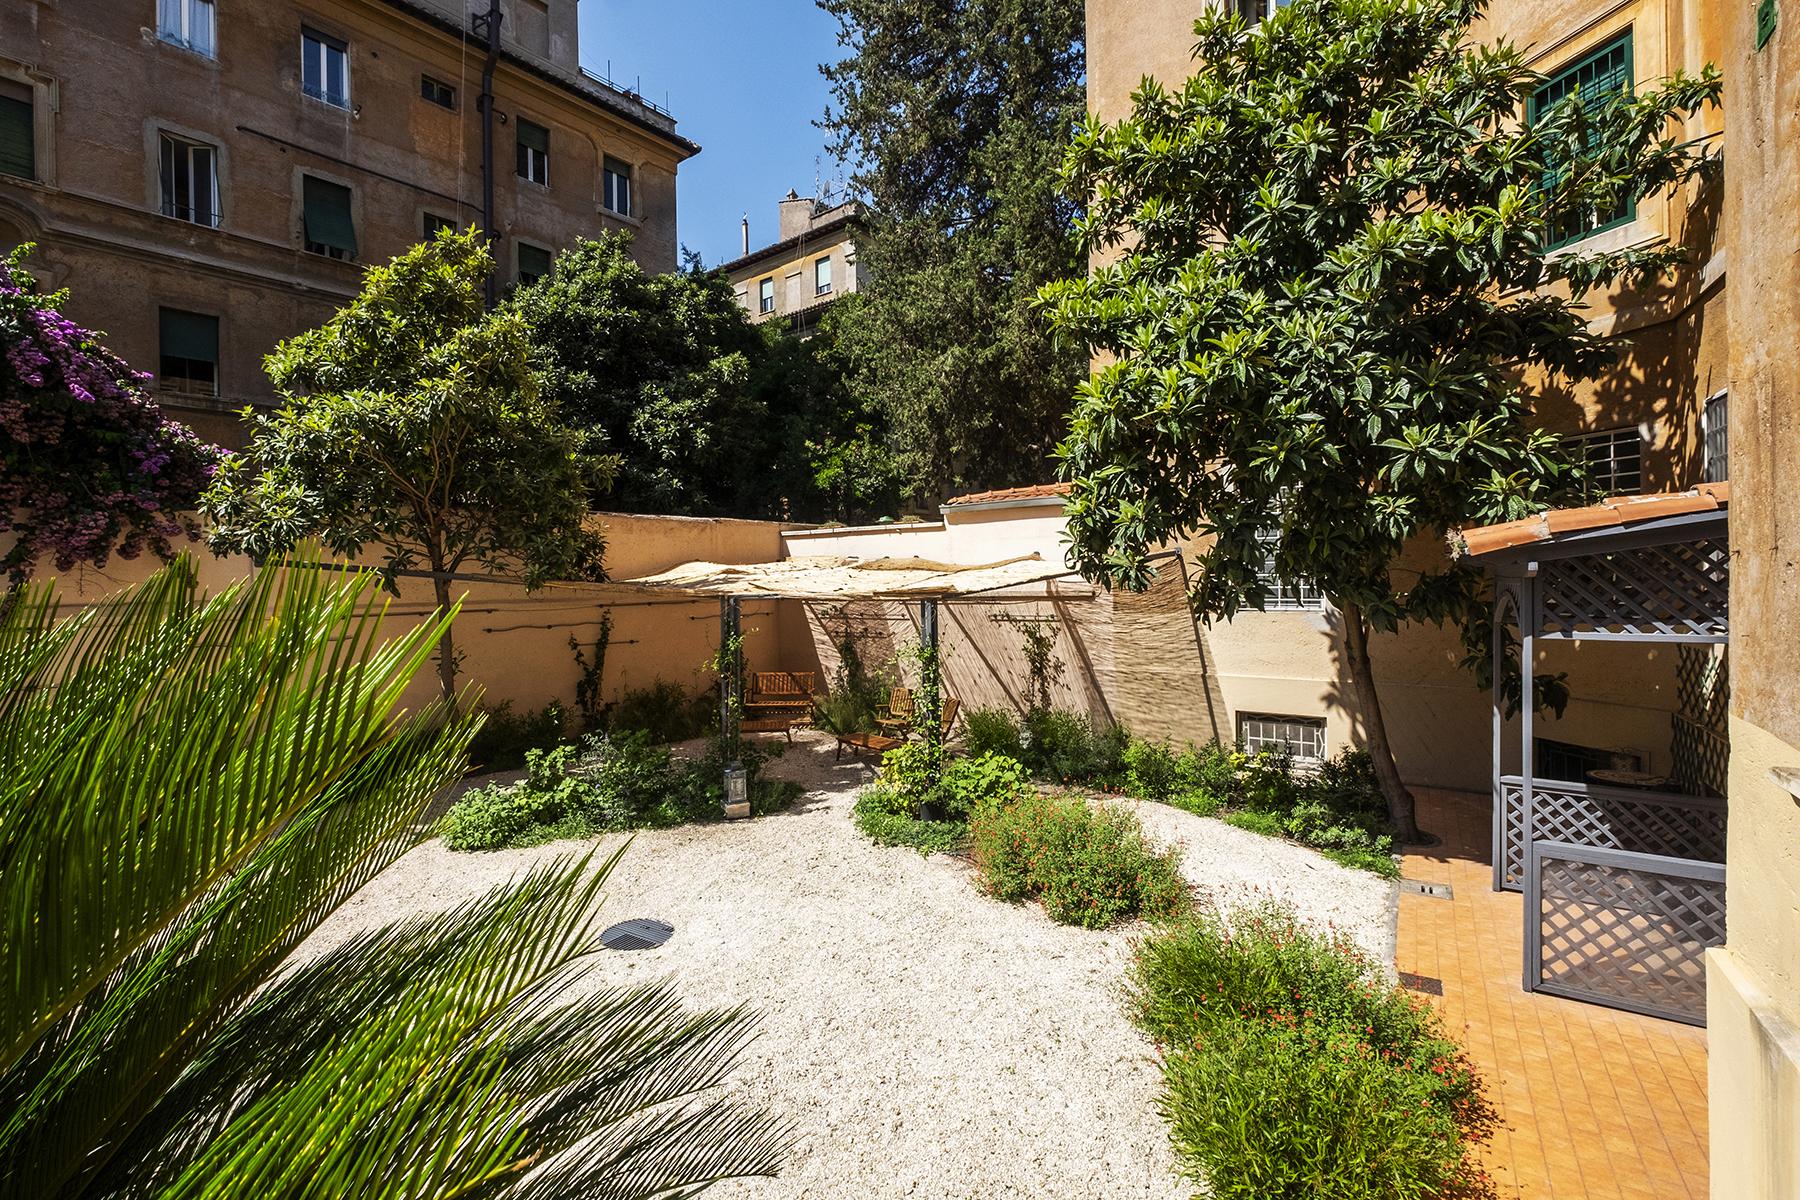 Elegant apartment with beautiful garden and 3 parking spaces in Parioli. - 11